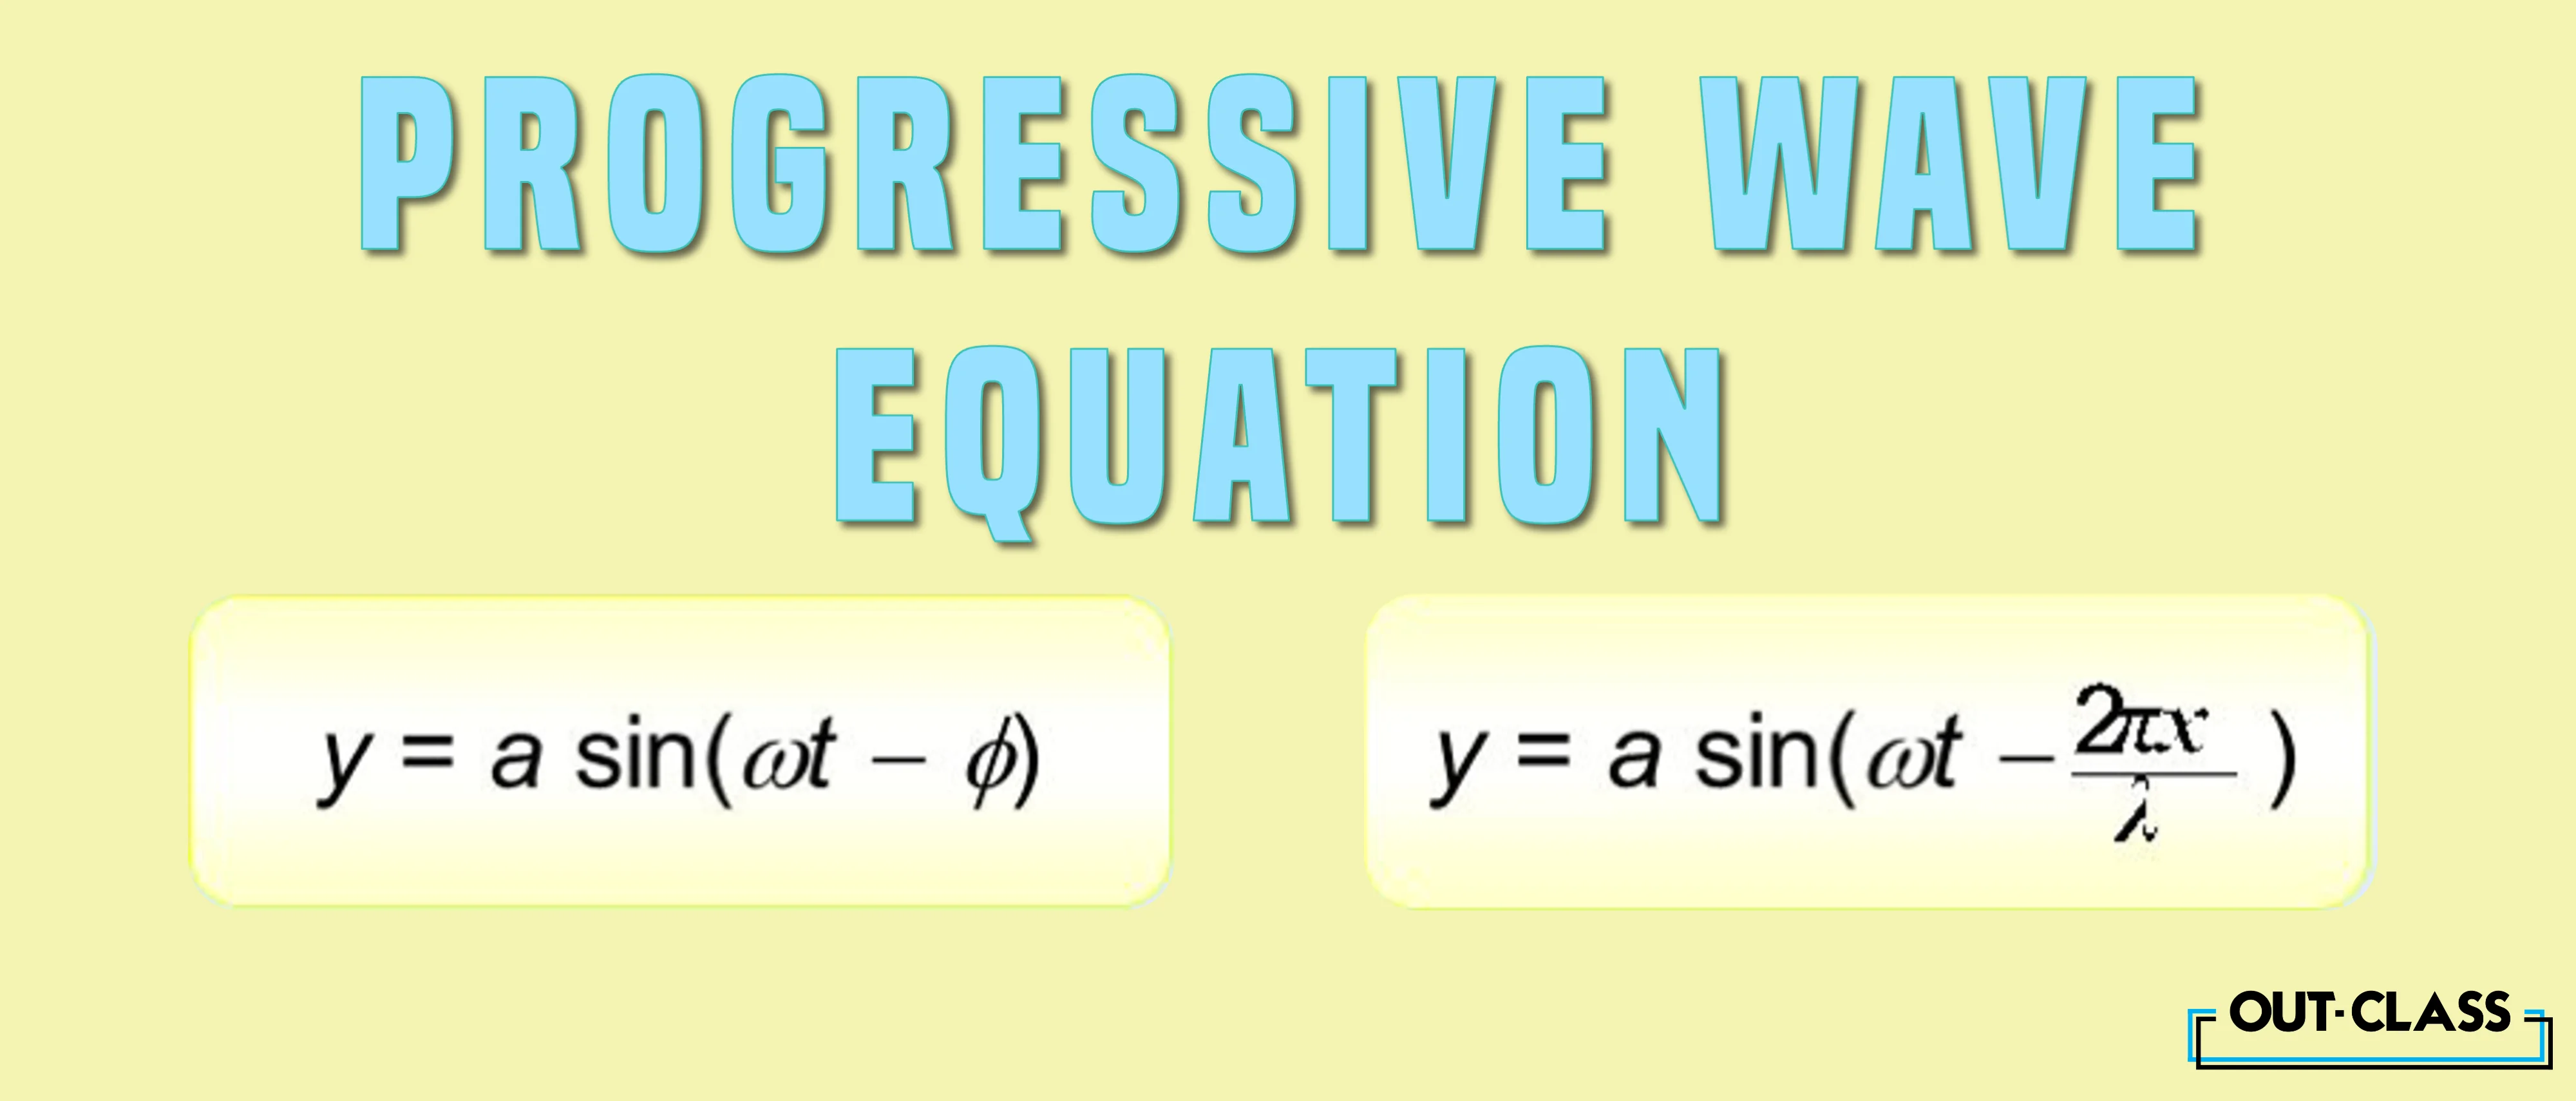 this covers a blog that what are progressive waves, its types, properties, characteristics, examples and the progressive wave equation.